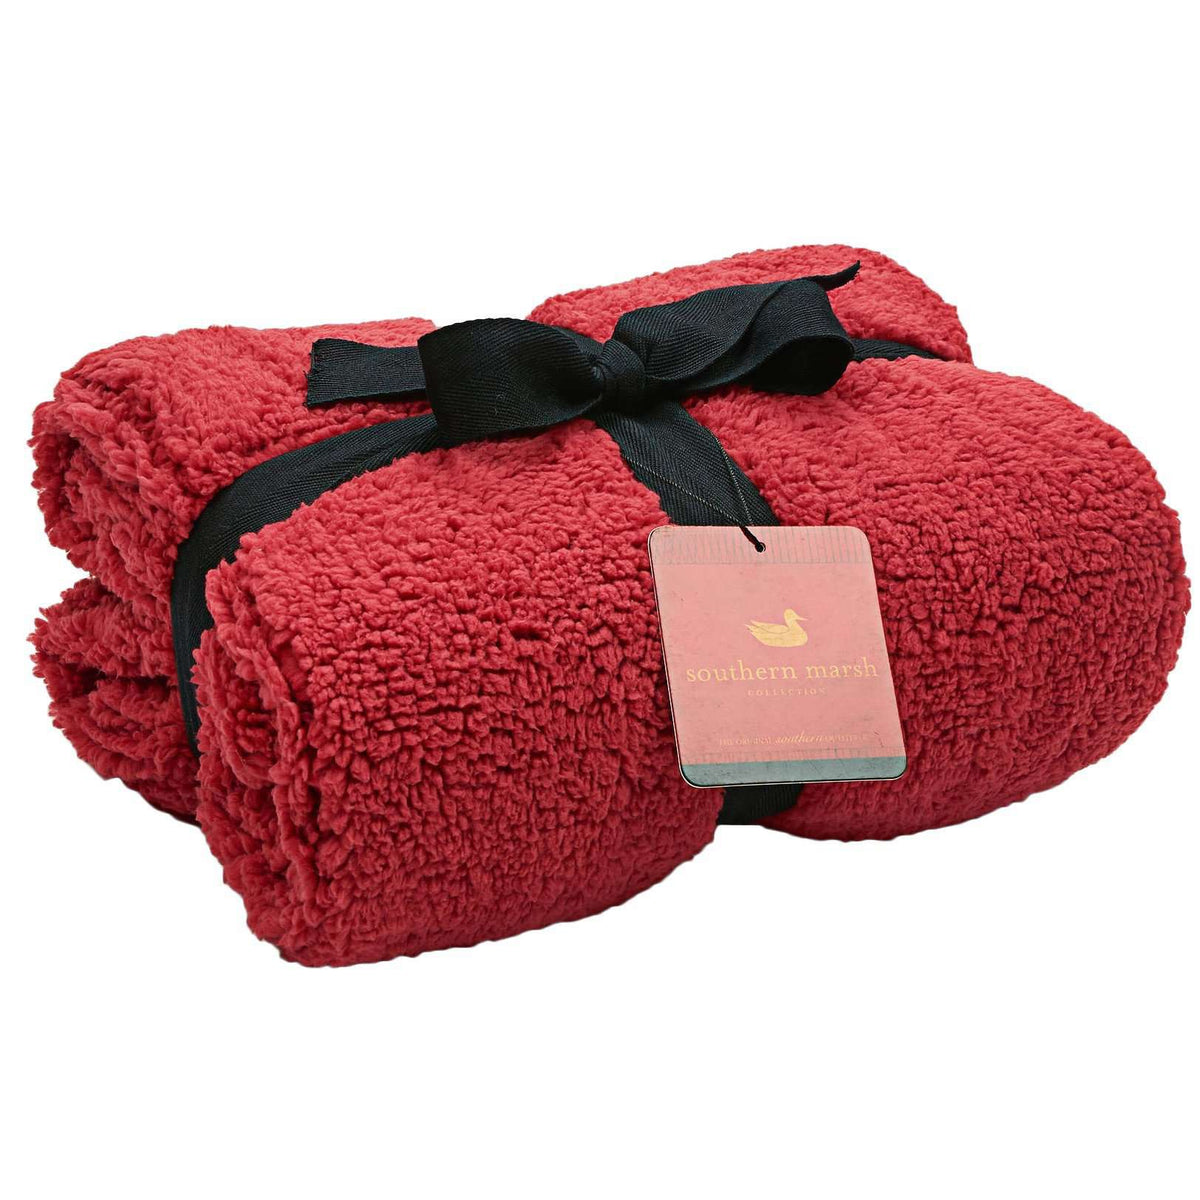 Watson Fluffy Pile & Tartan Blanket in Washed Red by Southern Marsh - Country Club Prep